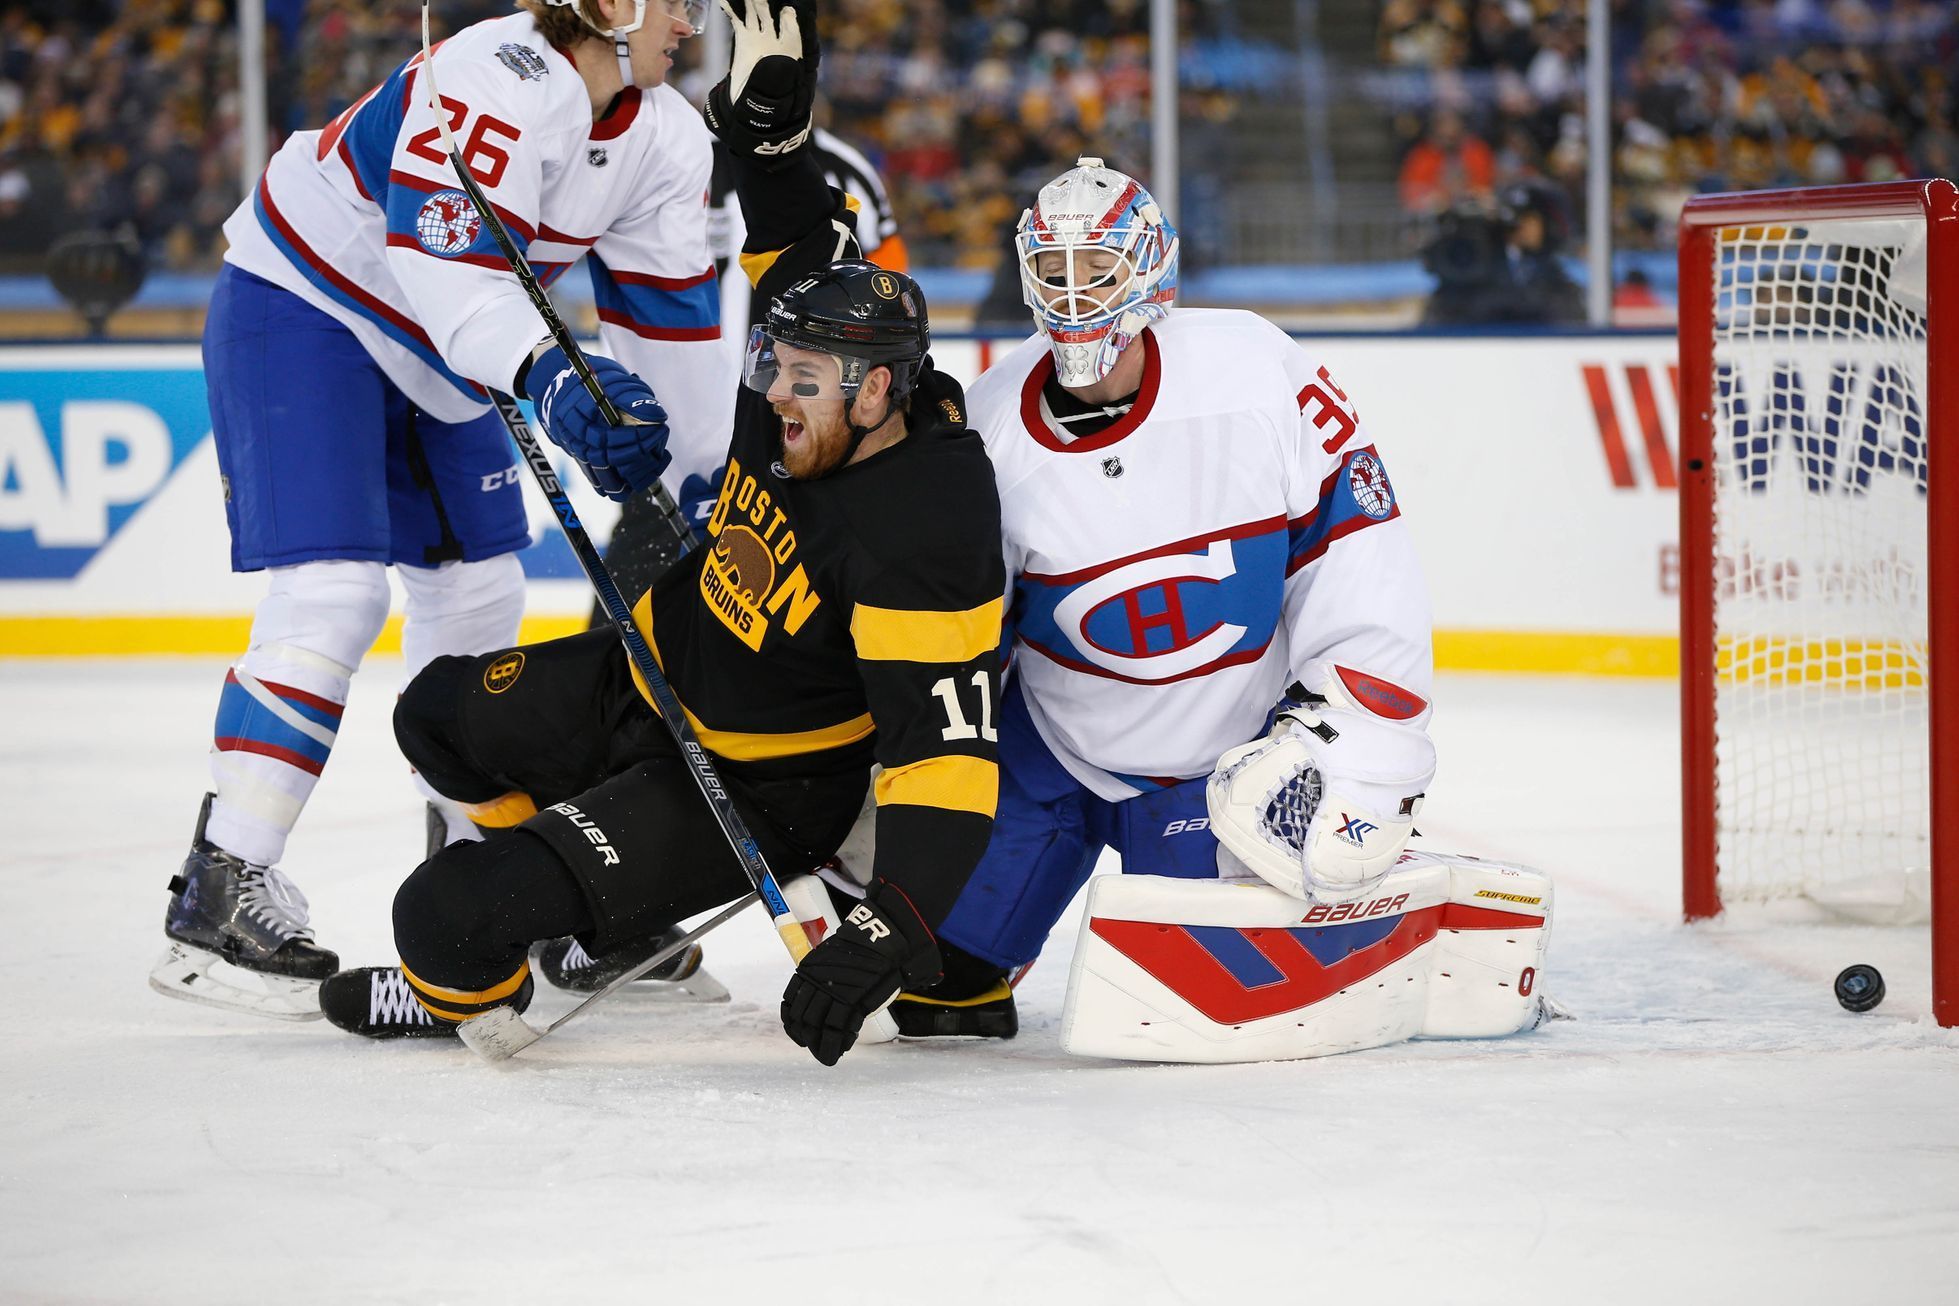 NHL: Winter Classic: Mike Condon (39)  - Jimmy Hayes (11)